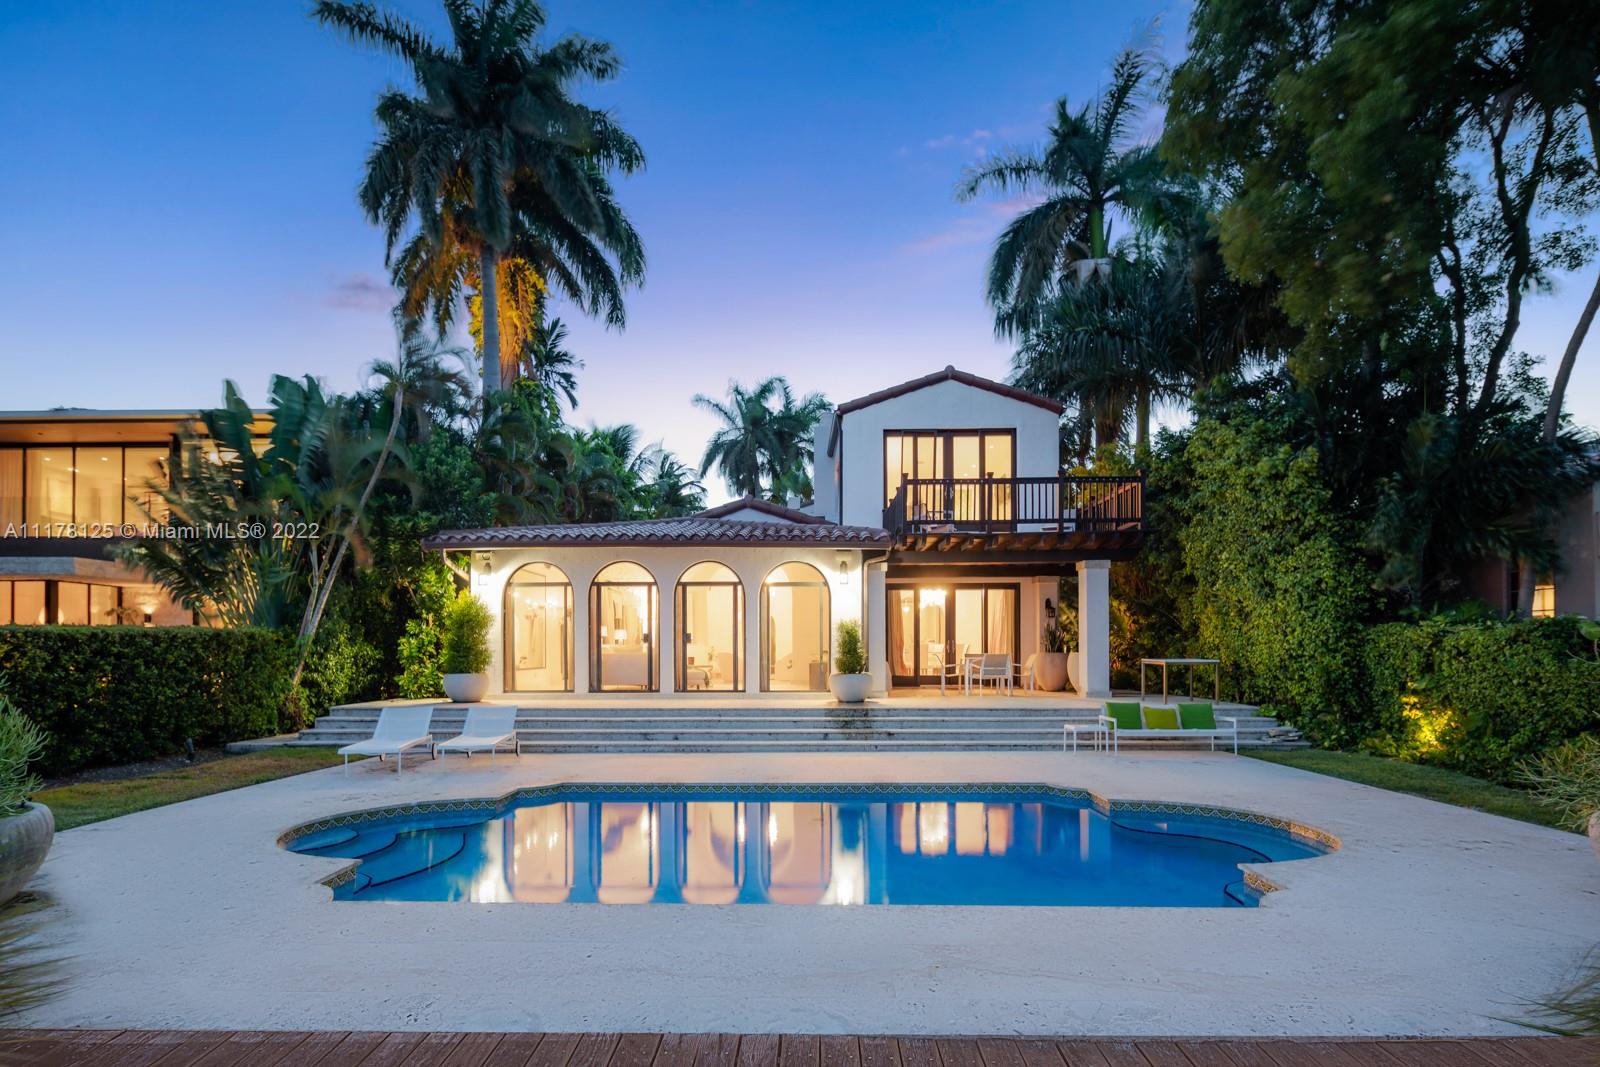 In the heart of the Venetian Islands, “El Escape”, which translates to “The Escape” in Spanish, truly merits its namesake. Retreat into lush gardens and be transported back to 1932.  This home boasts a gated entrance, guest house, restored to perfection flooring, pool & dock, which creates the perfect backyard for entertaining. Romantic and unique, take in the privacy from your primary suite balcony overlooking the beautiful Biscayne Bay views. Located on Dilido Island, this home is just a short distance to the Sunset Harbour neighborhood where you can enjoy some of the city’s best restaurants, shops, wellness & more.